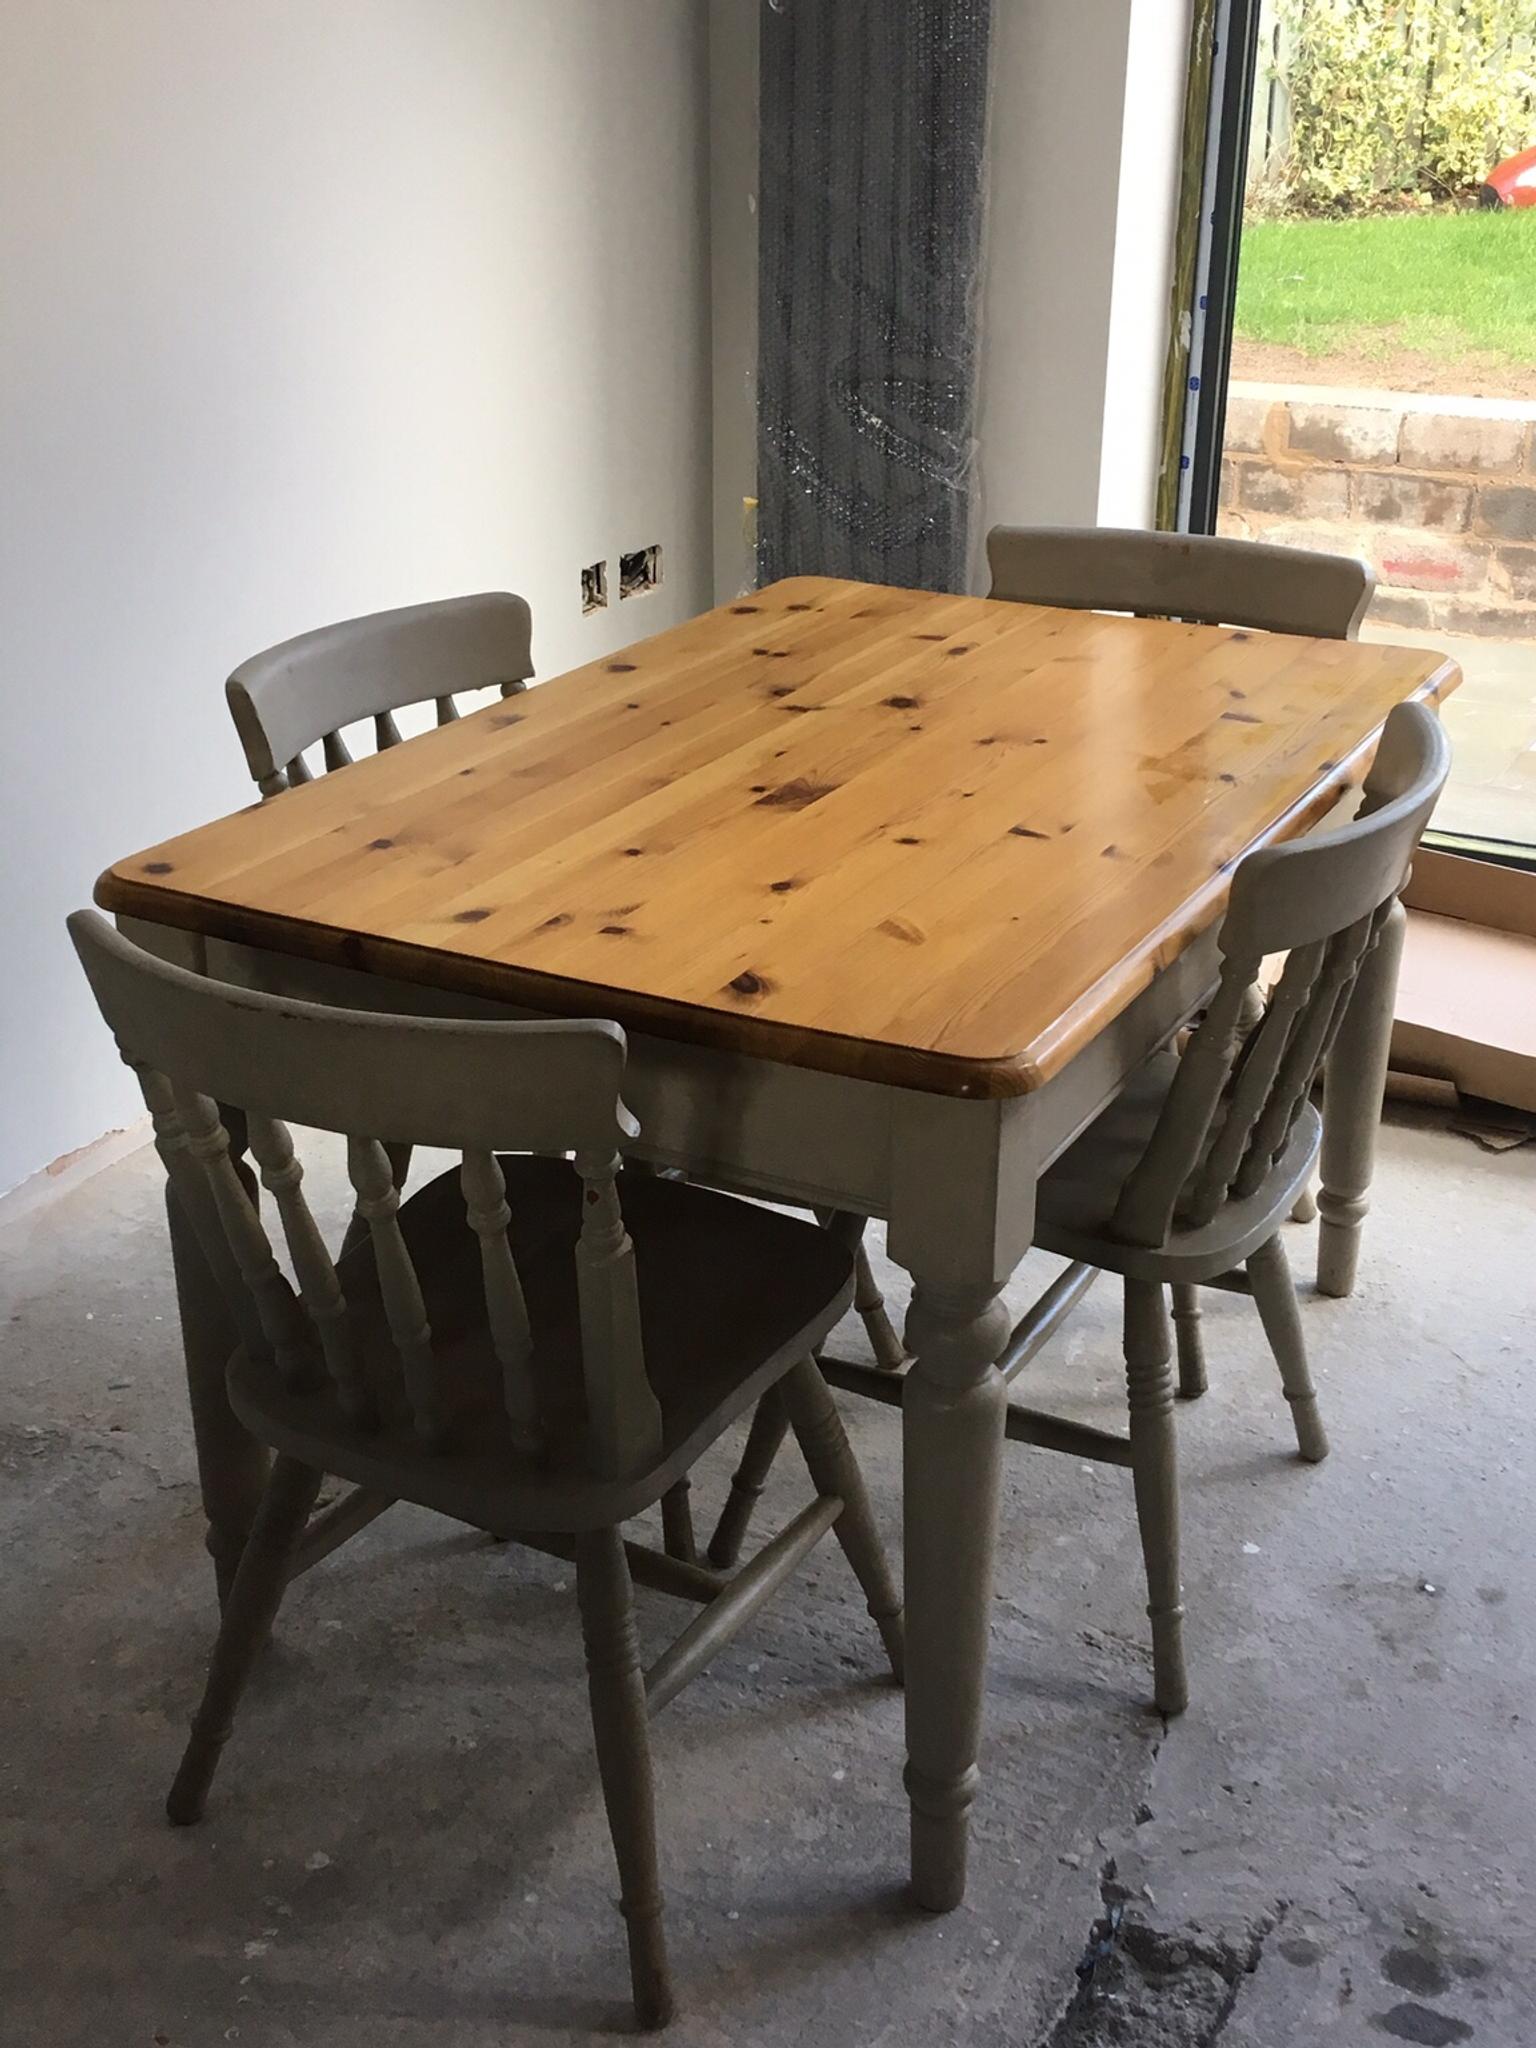 Shabby Chic Pine Table And Four Chairs In Dn10 Bassetlaw Fur 125